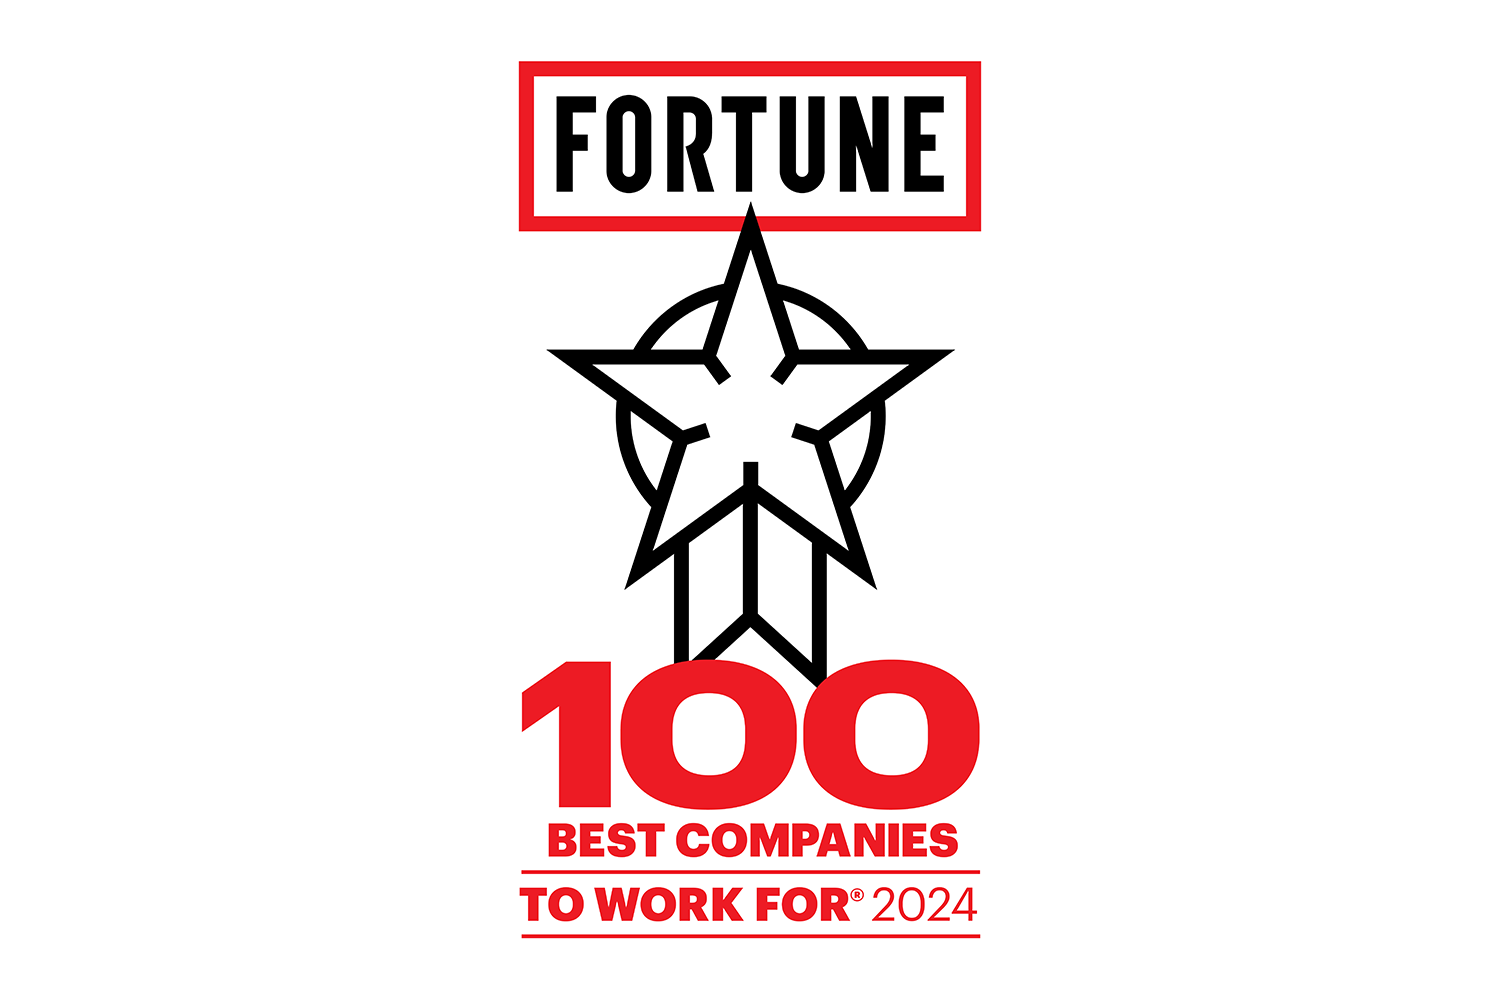 For the ninth year in a row, Slalom recognized as a Fortune 100 Best Companies to Work For